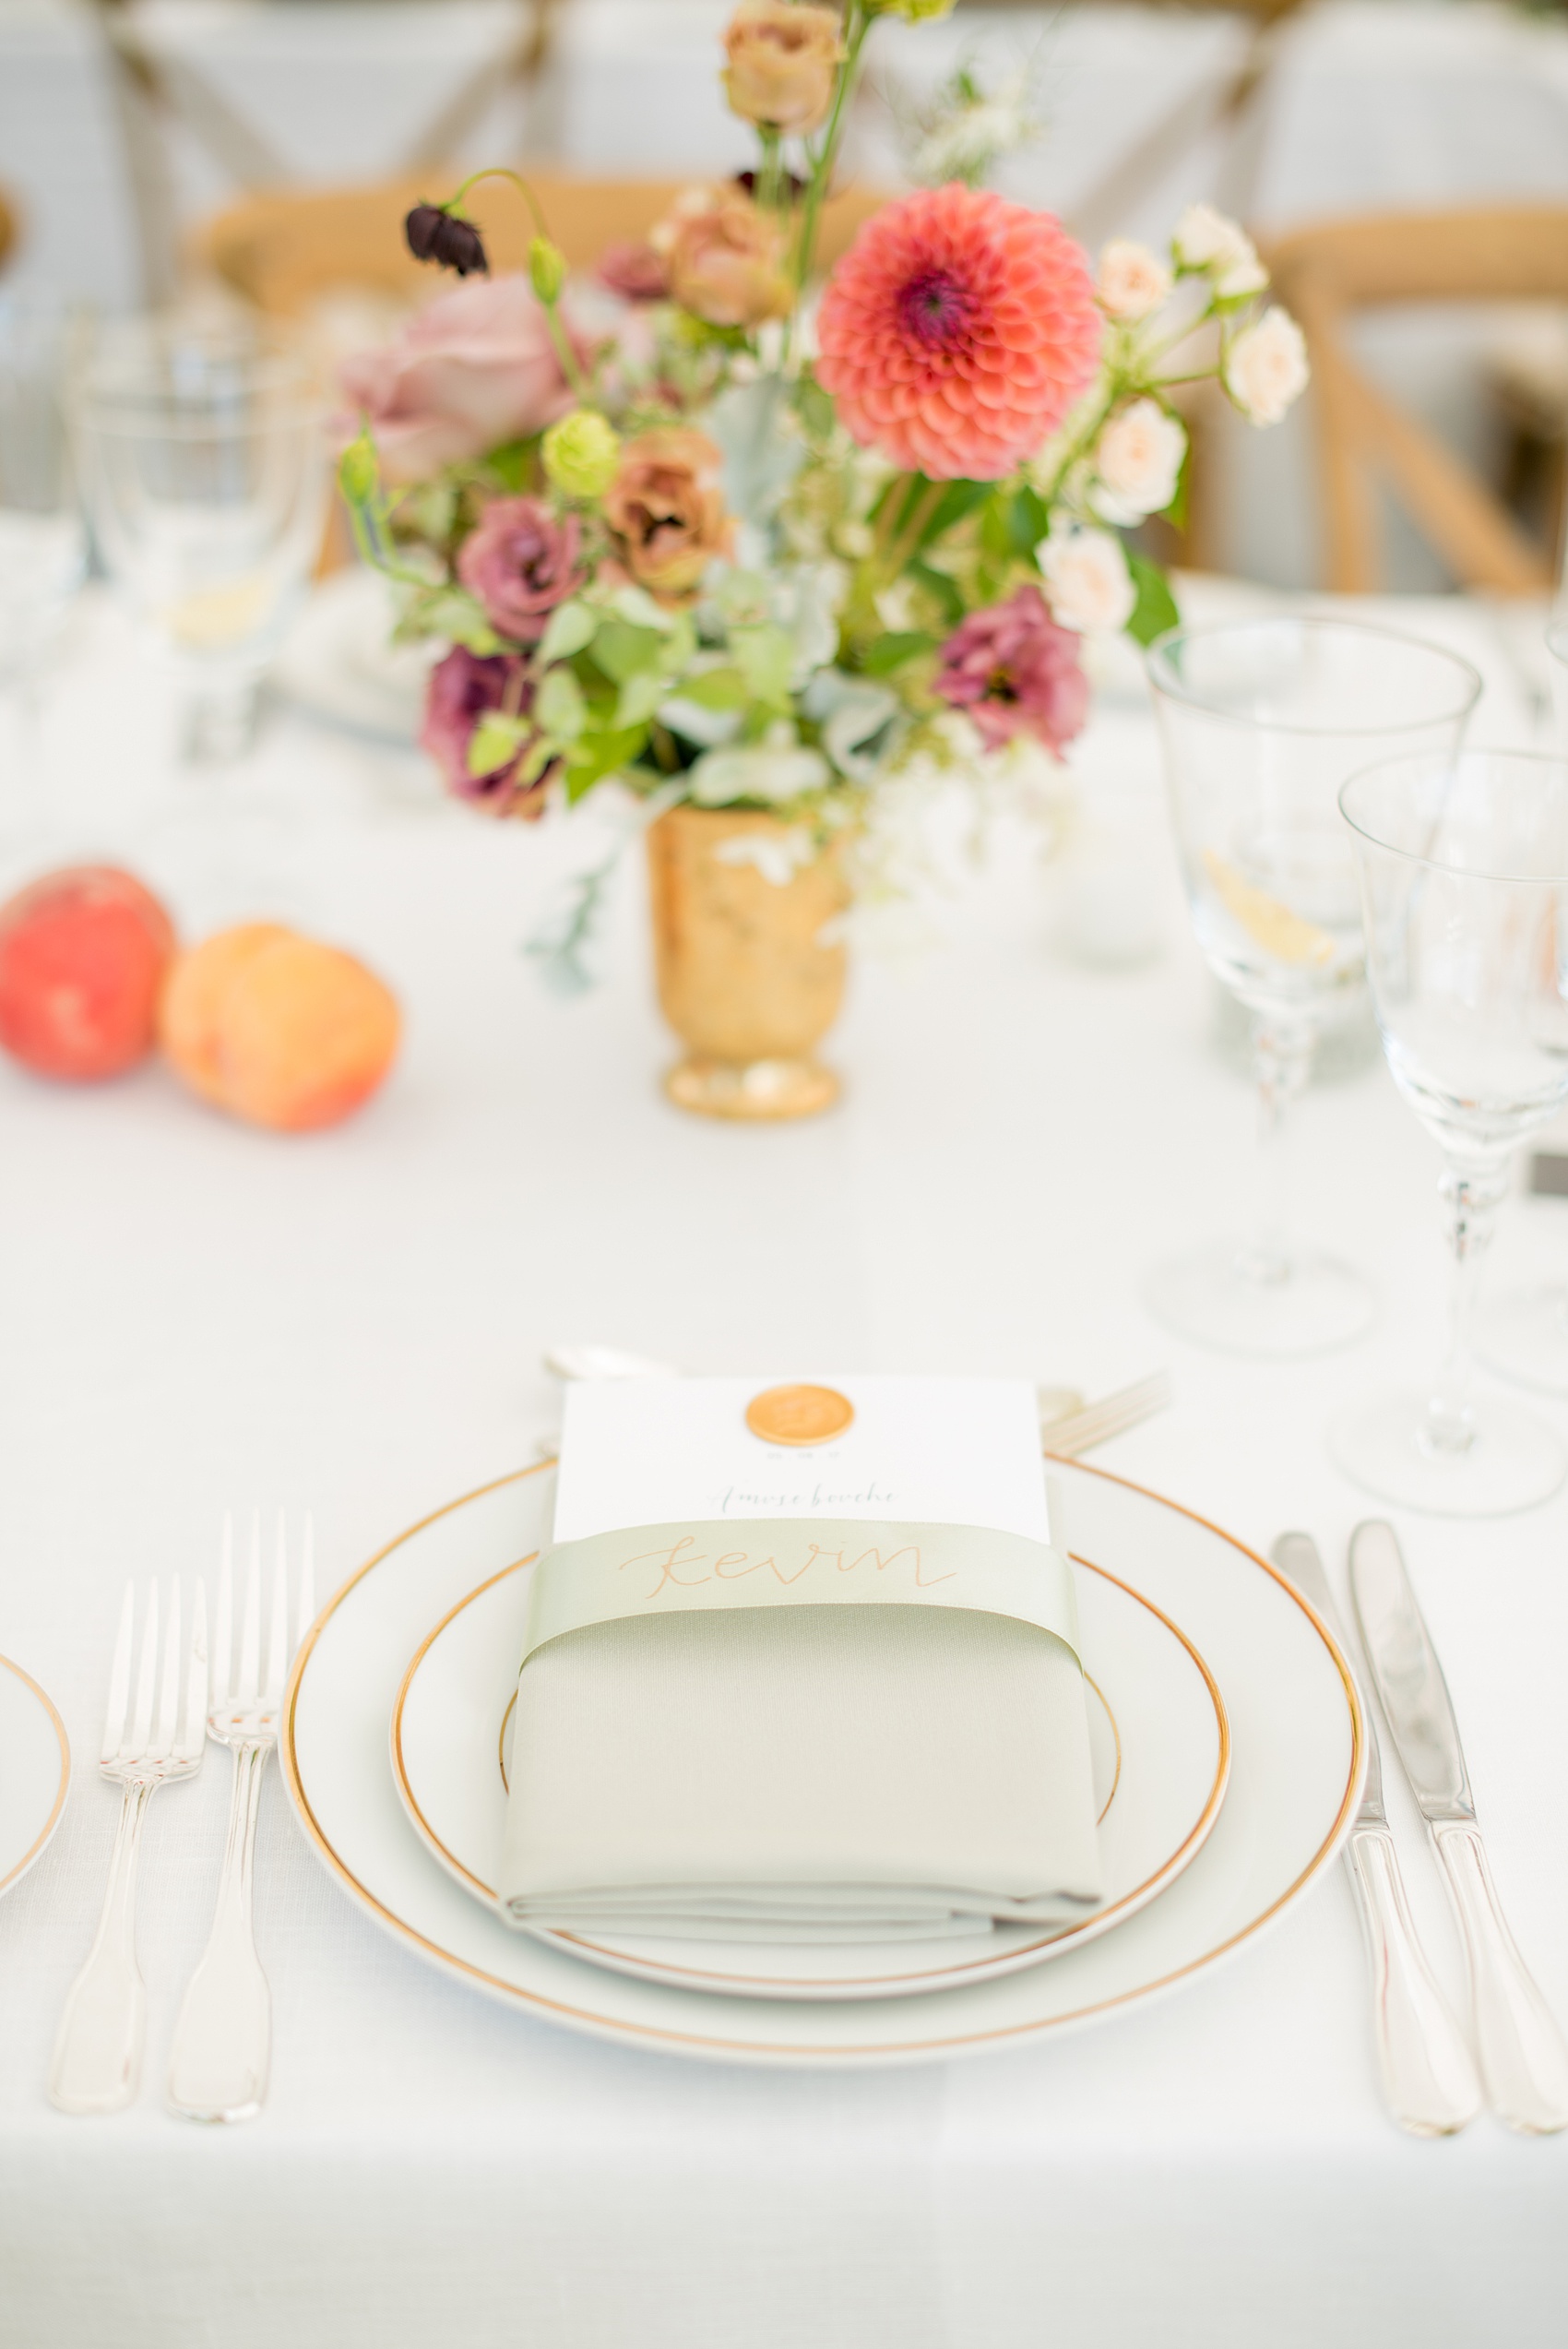 Mikkel Paige Photography photos from a Southwood Estate Wedding in Germantown, New York in the Hudson Valley. Picture of the custom menu ribbon place cards and wax seal menu cards in the reception tent with peach and light green colors.